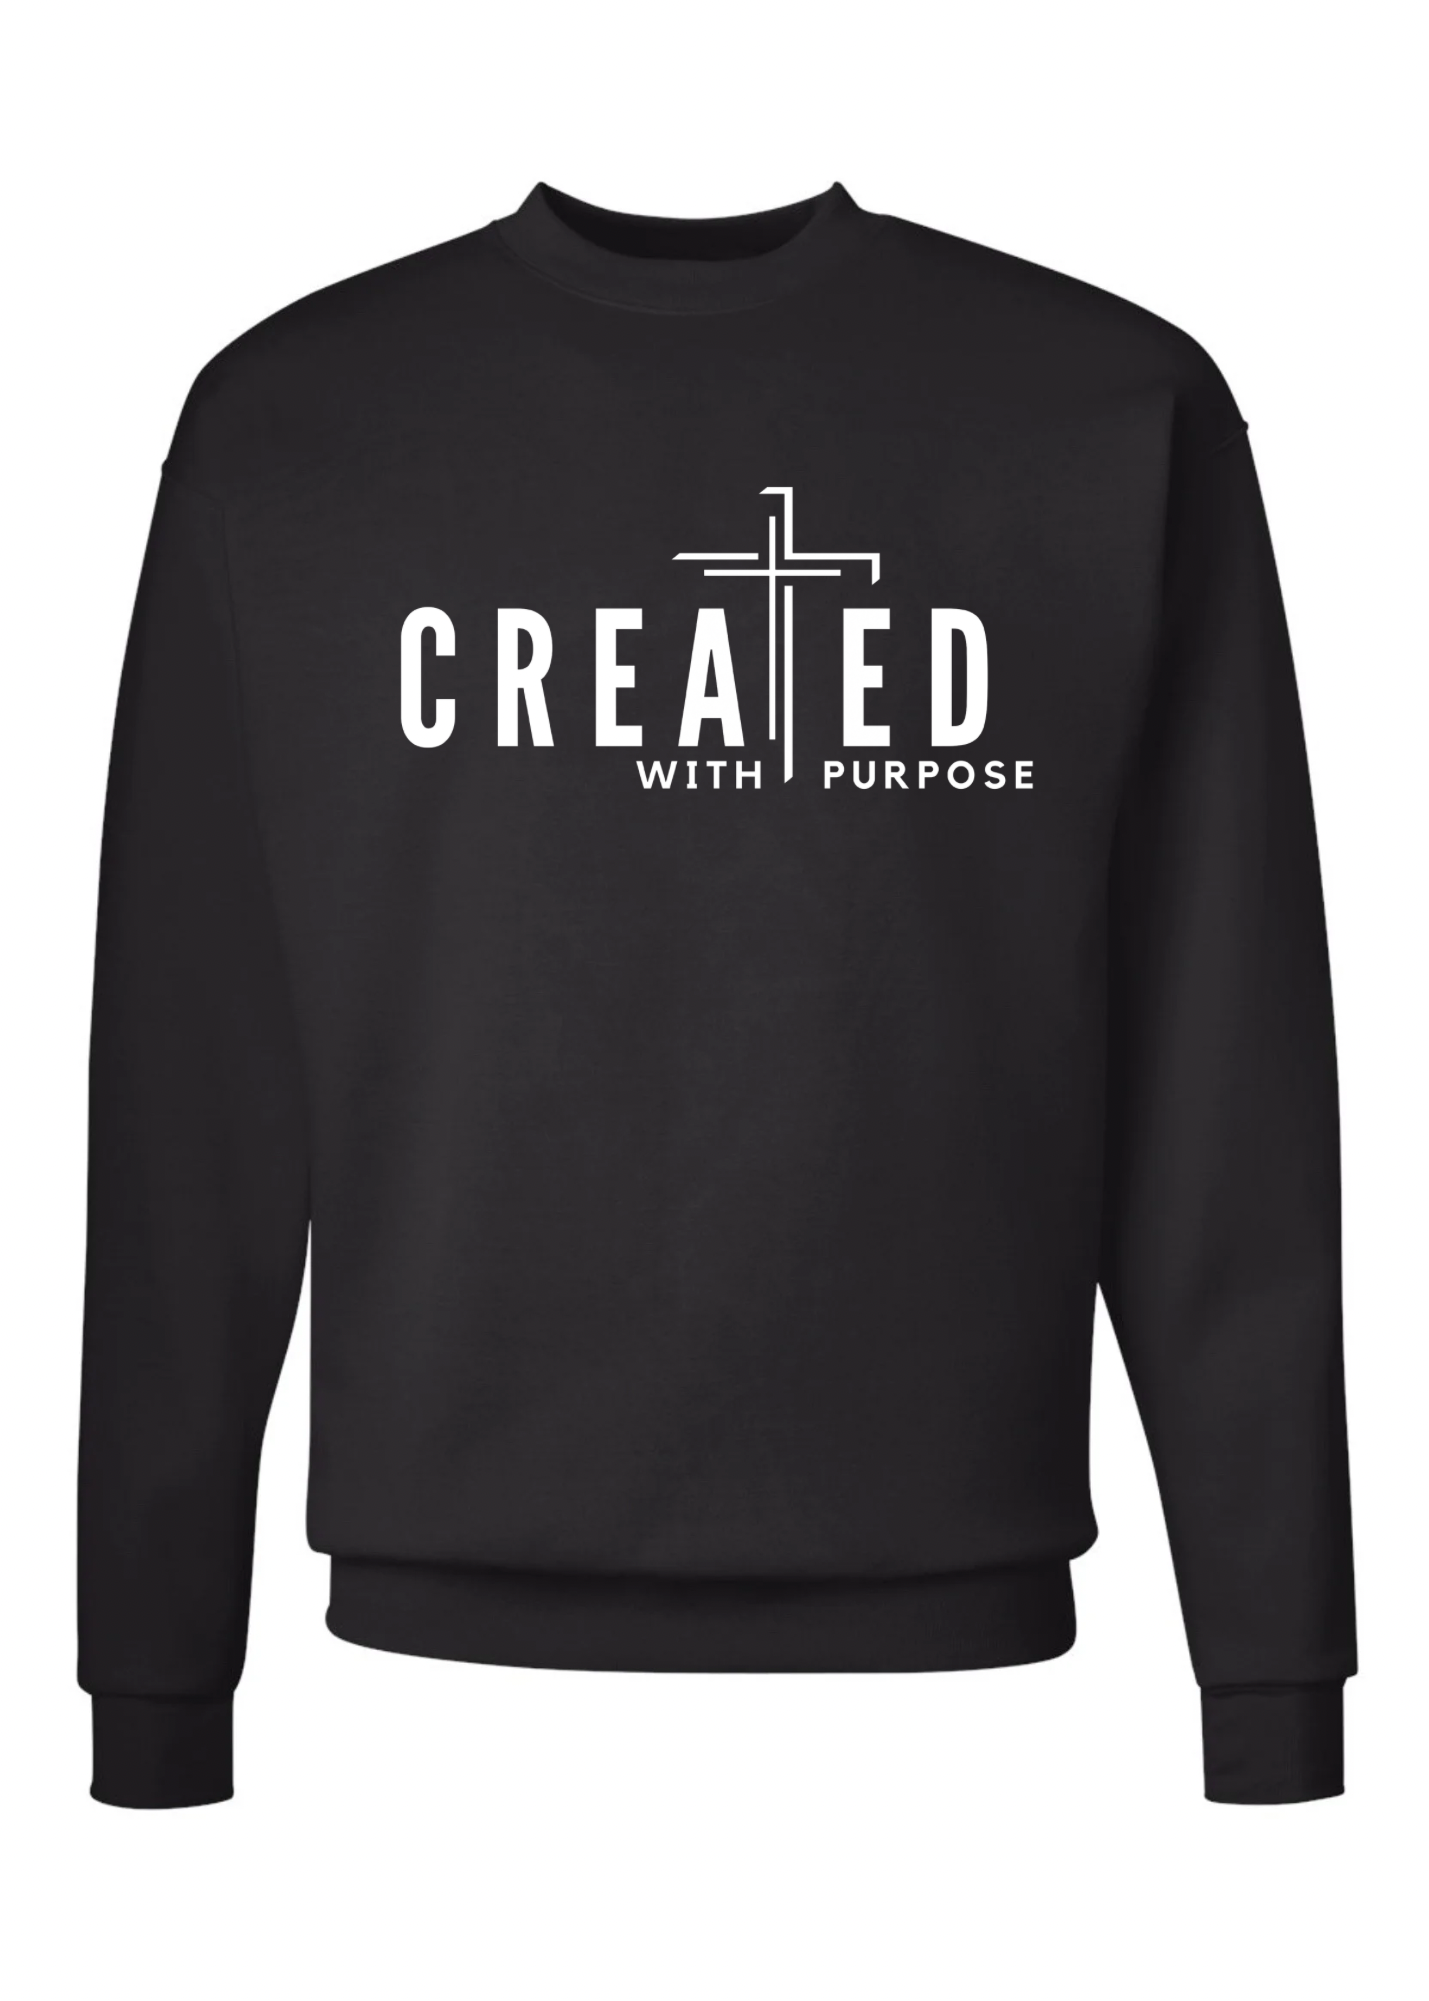 Created With Purpose Crew Sweatshirt - 3 colors available